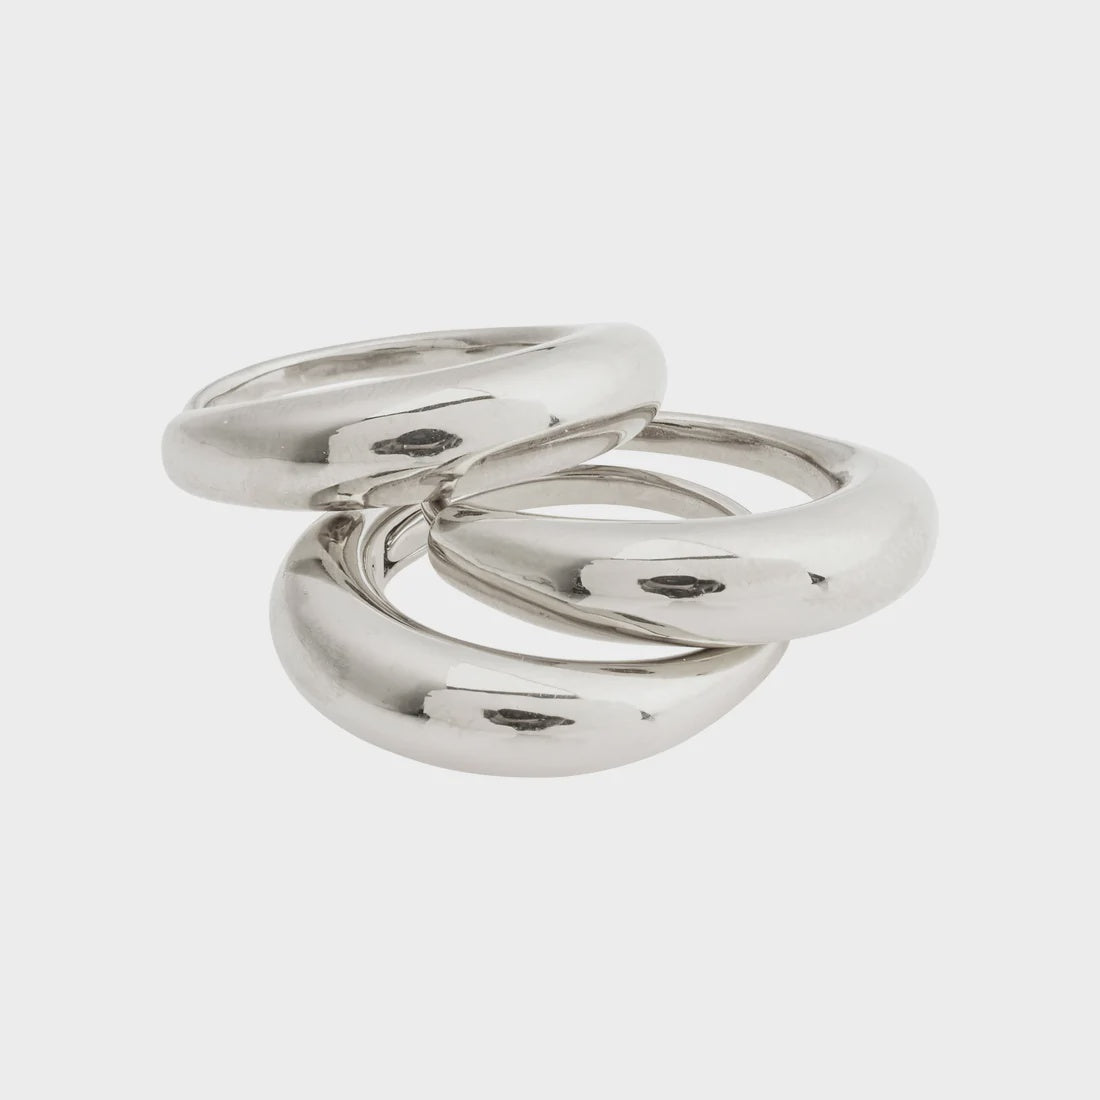 Be Rings - set 3 silver